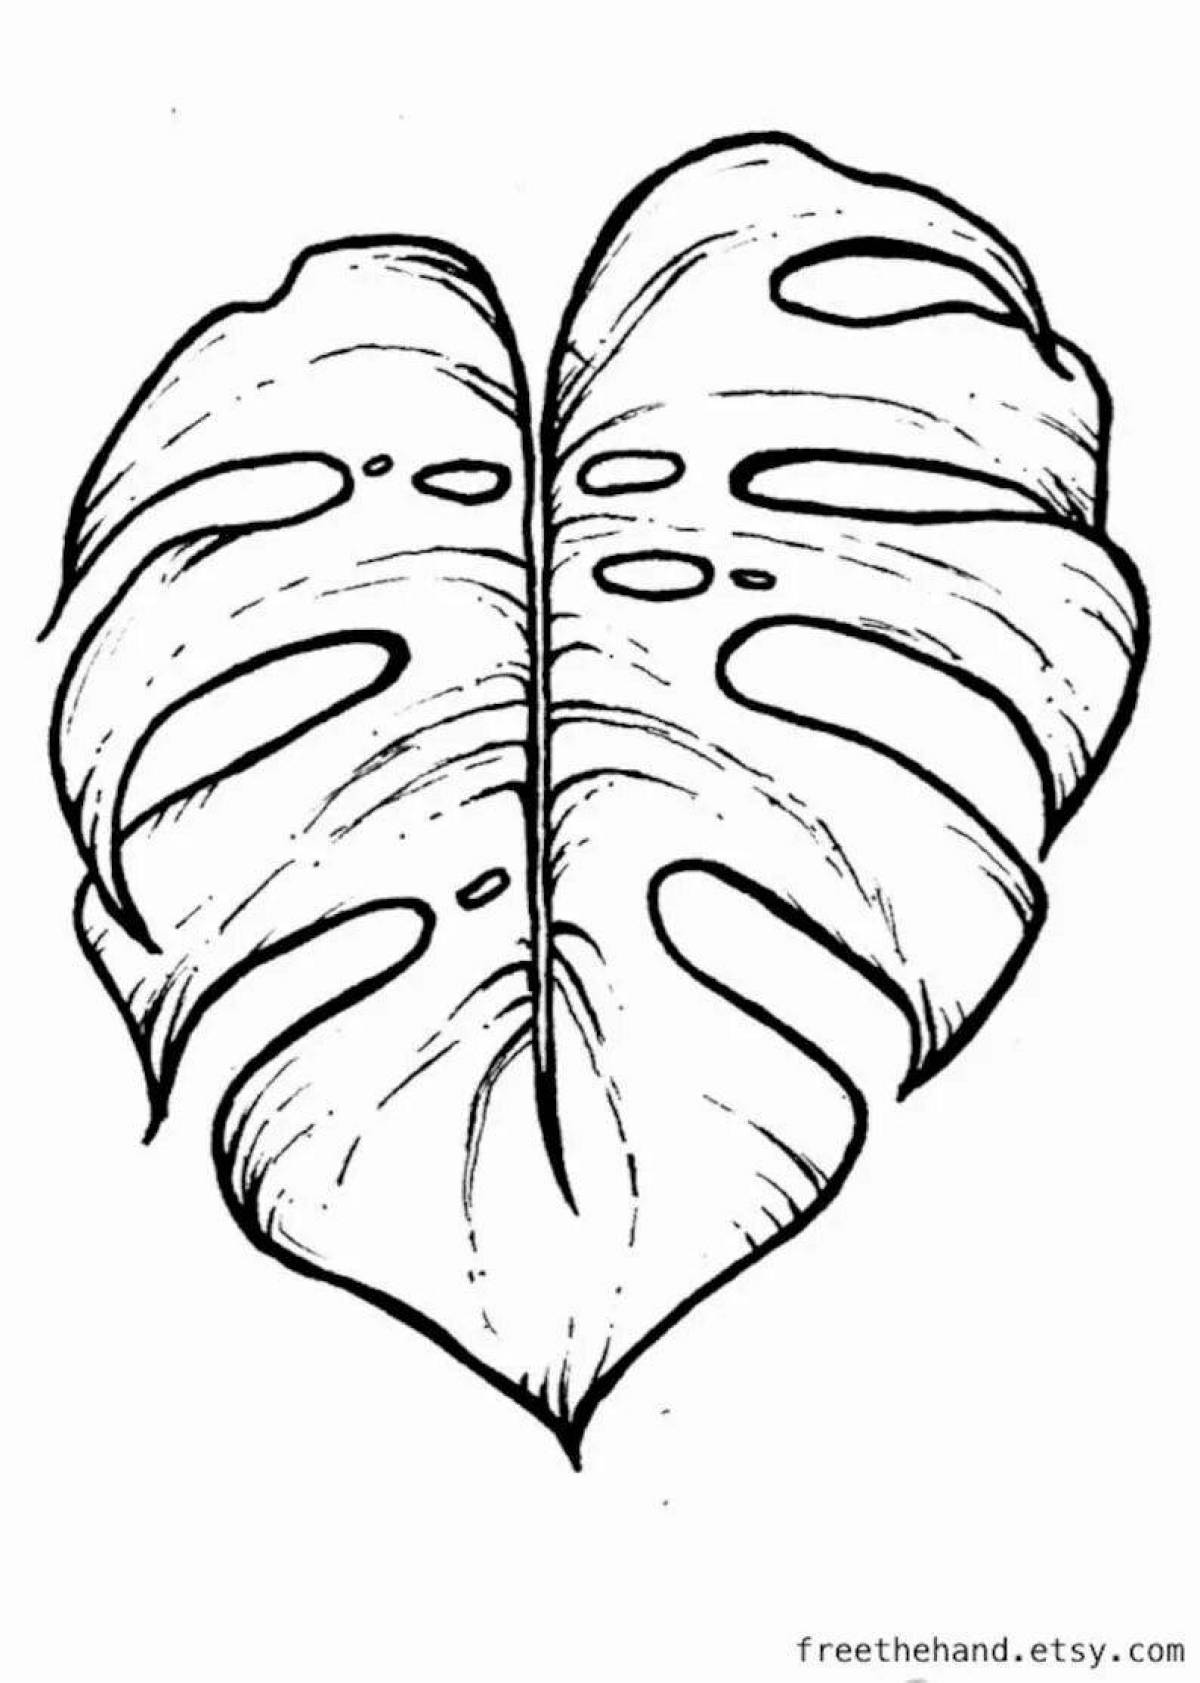 Playful monstera leaf coloring page